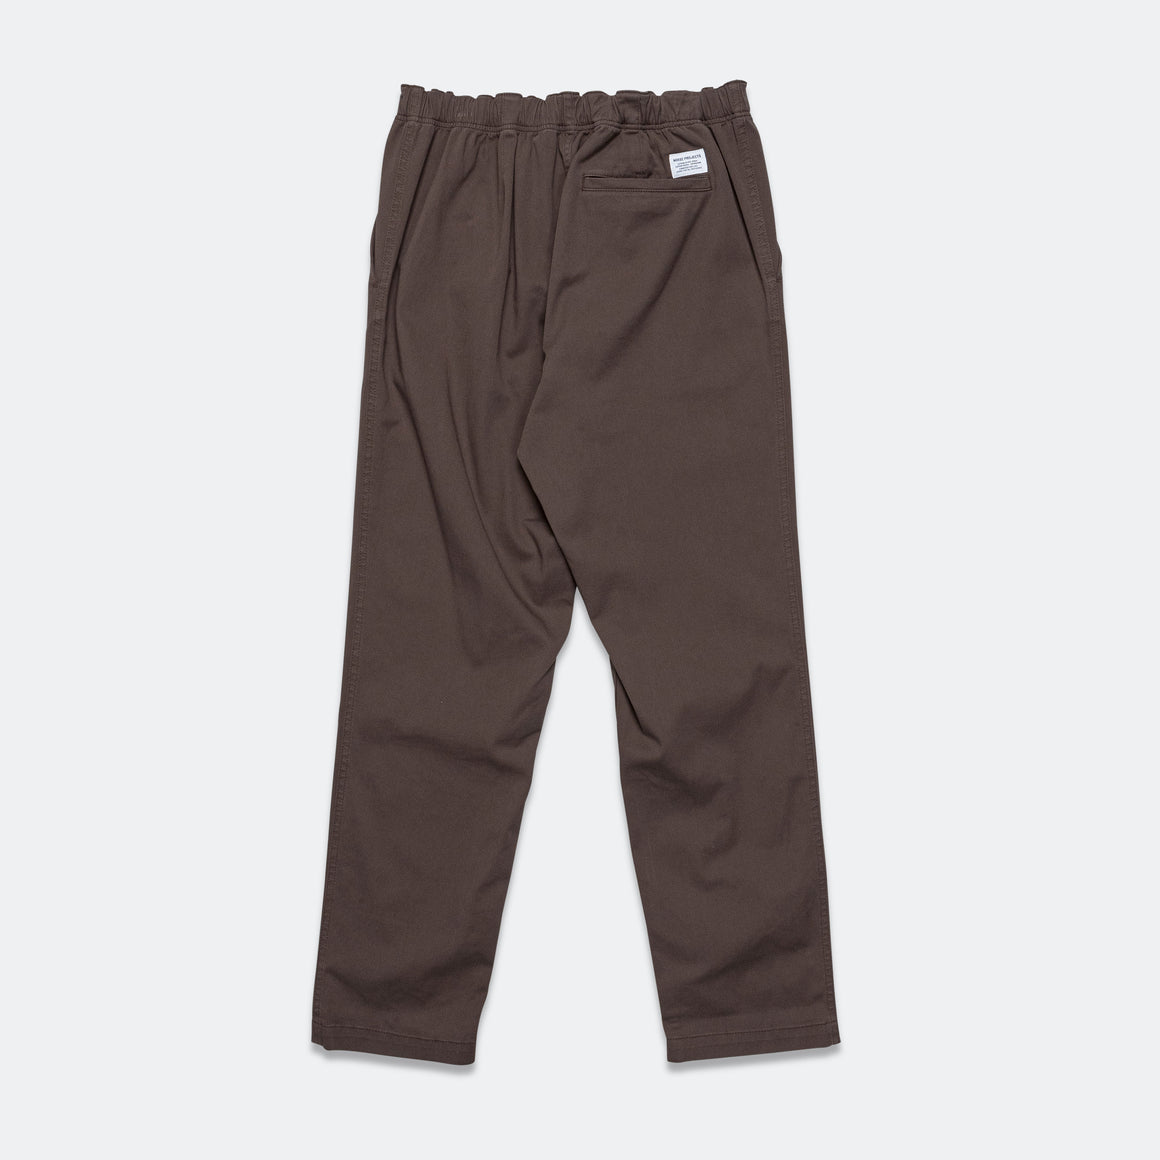 Norse Projects - Ezra Light Stretch - Heathland Brown - UP THERE